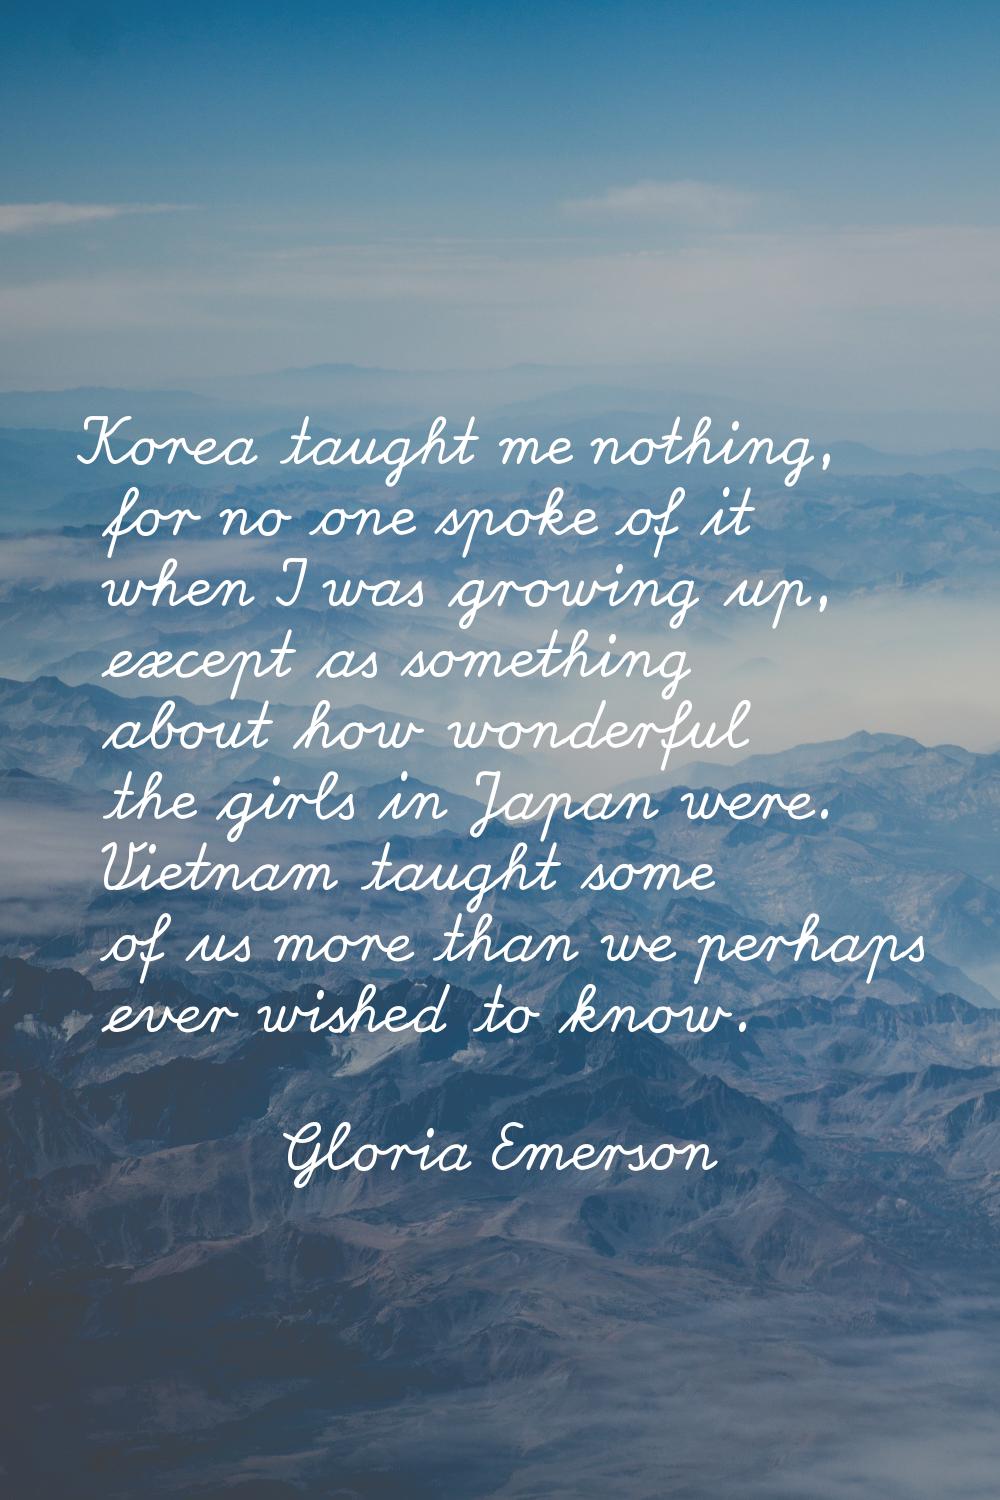 Korea taught me nothing, for no one spoke of it when I was growing up, except as something about ho